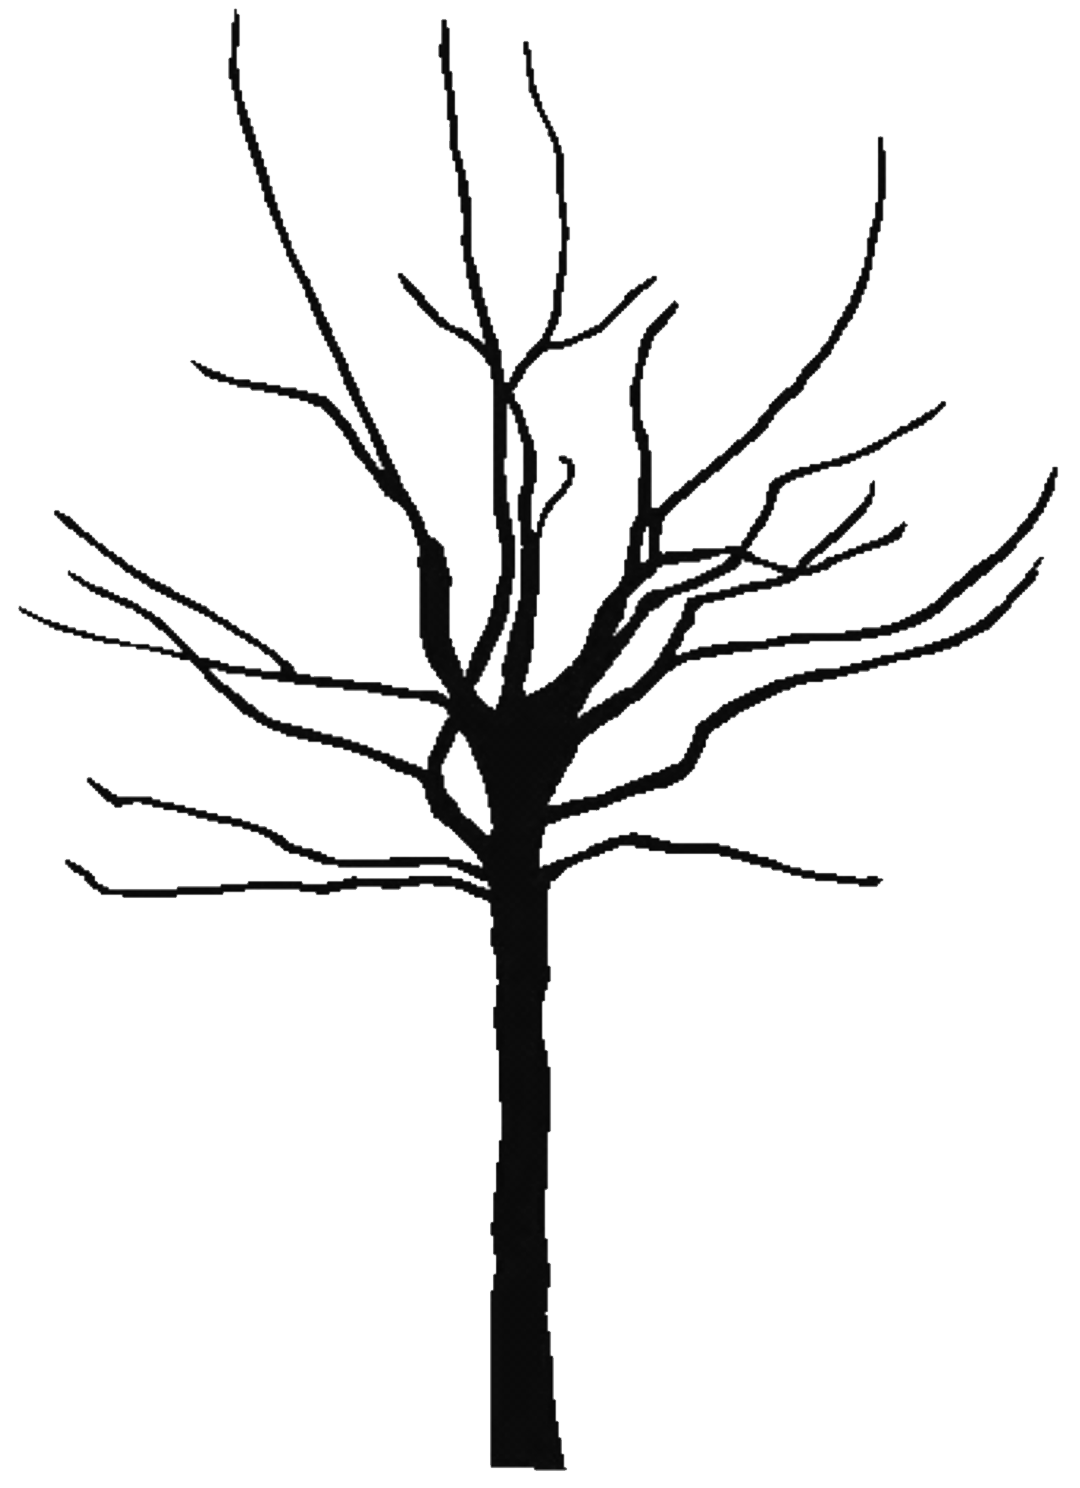 Tree black and white black tree outline free download clip art on